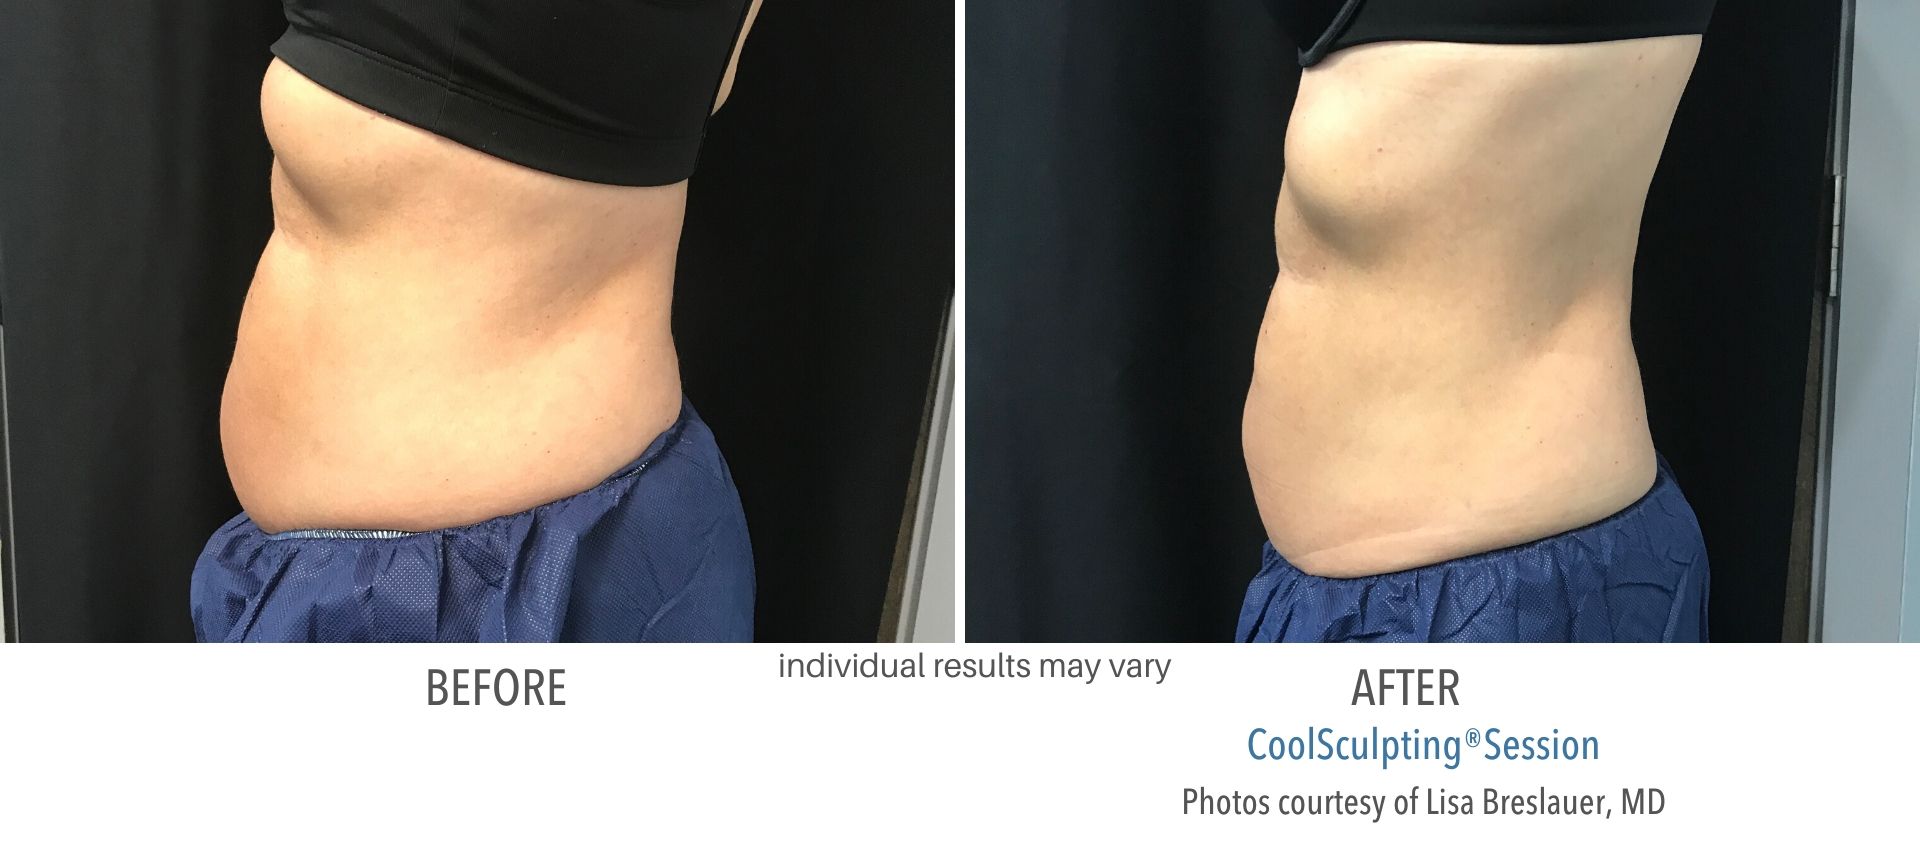 Coolsculpting before and after of abdomen at Laser + Skin Institute in Chatham, NJ.